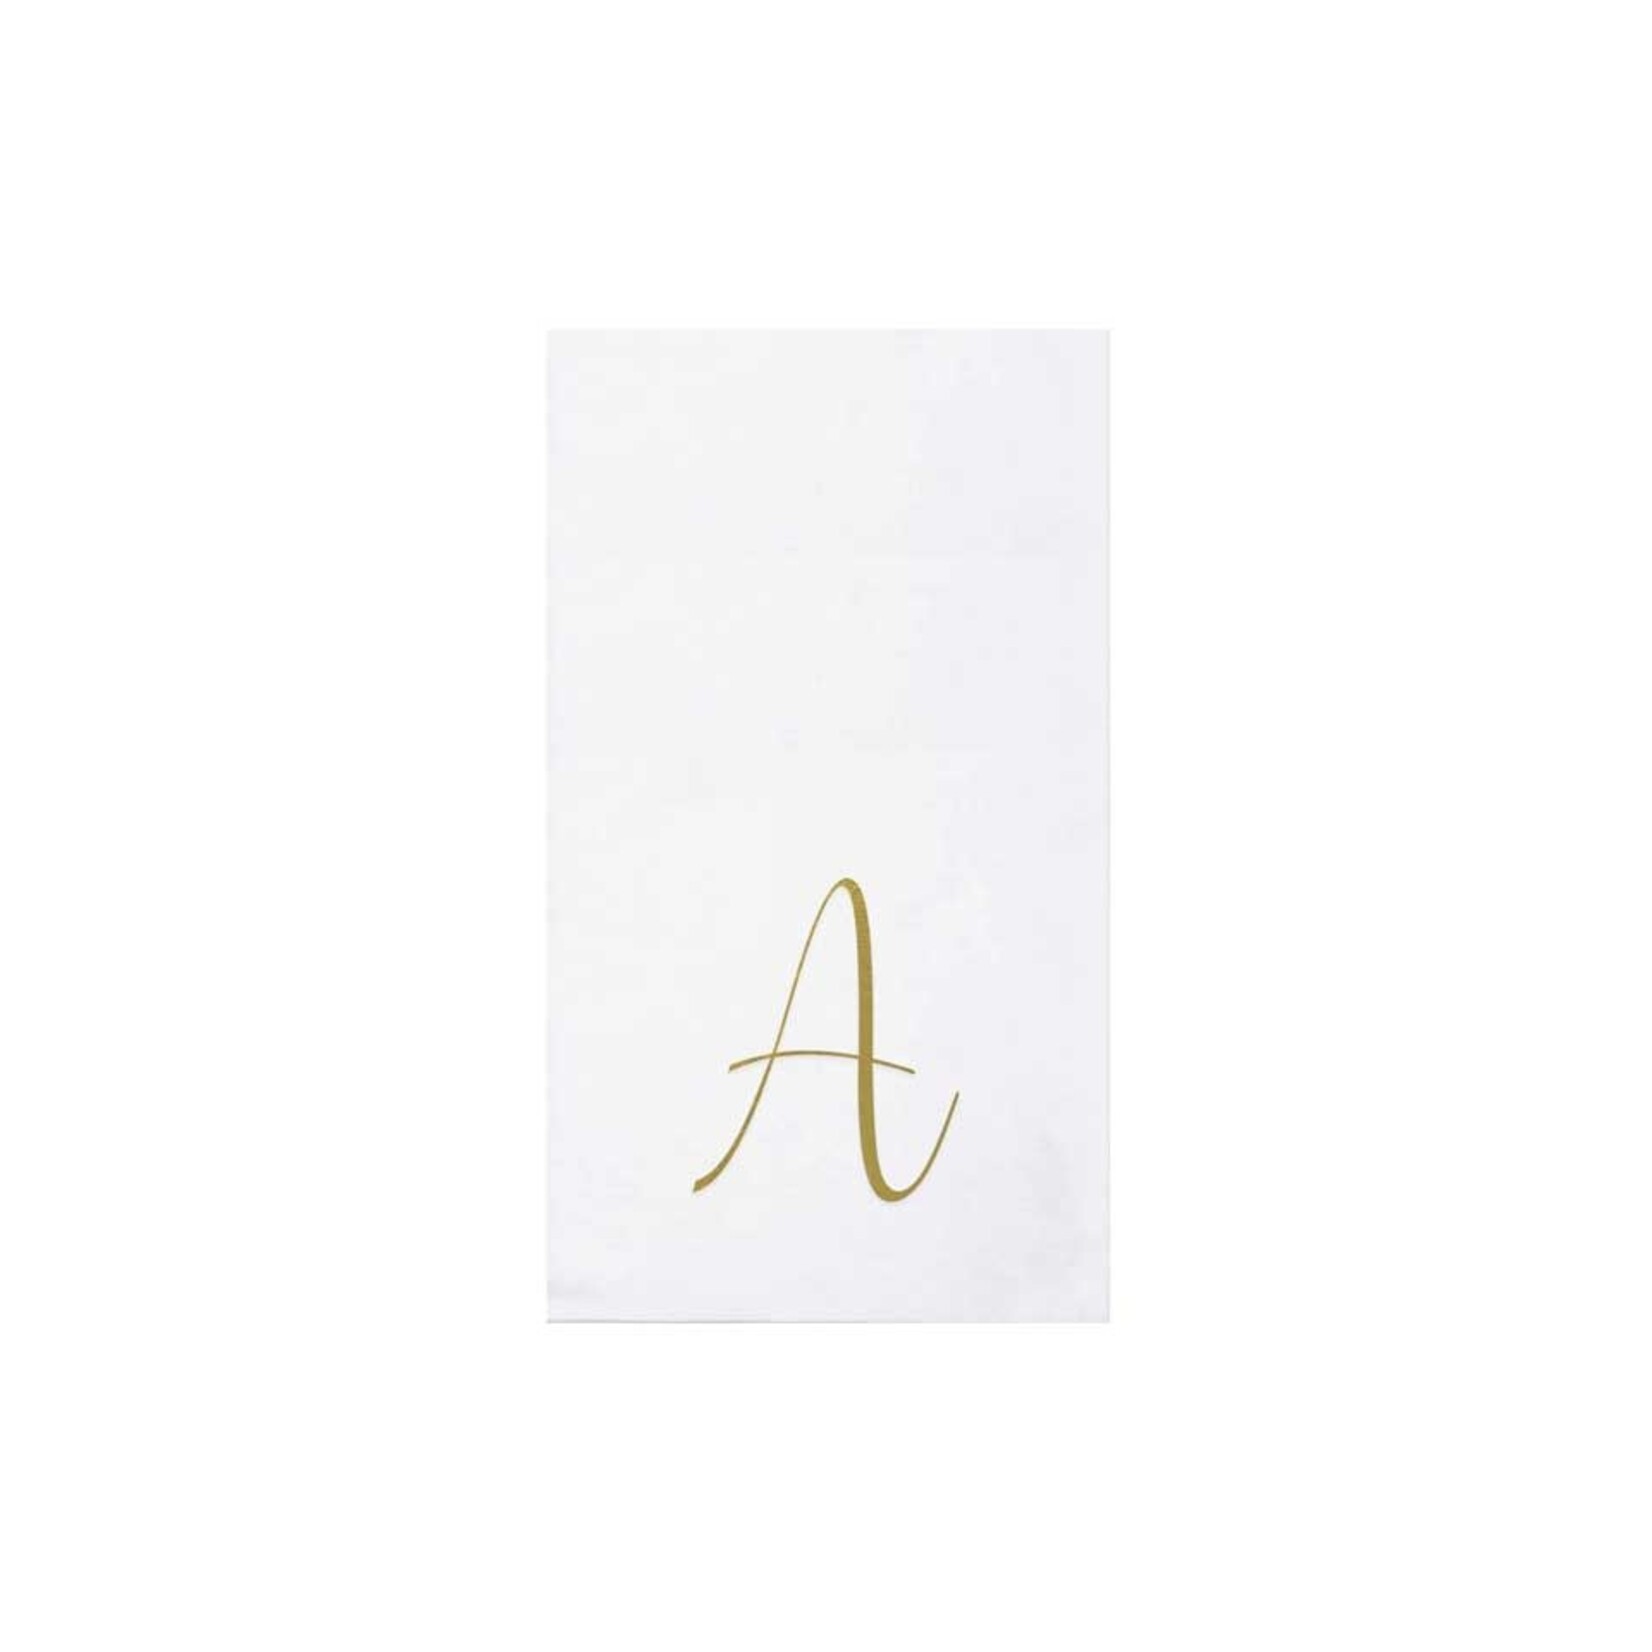 VIETRI Papersoft Napkins Gold Monogram Guest Towels - A (Pack of 20)